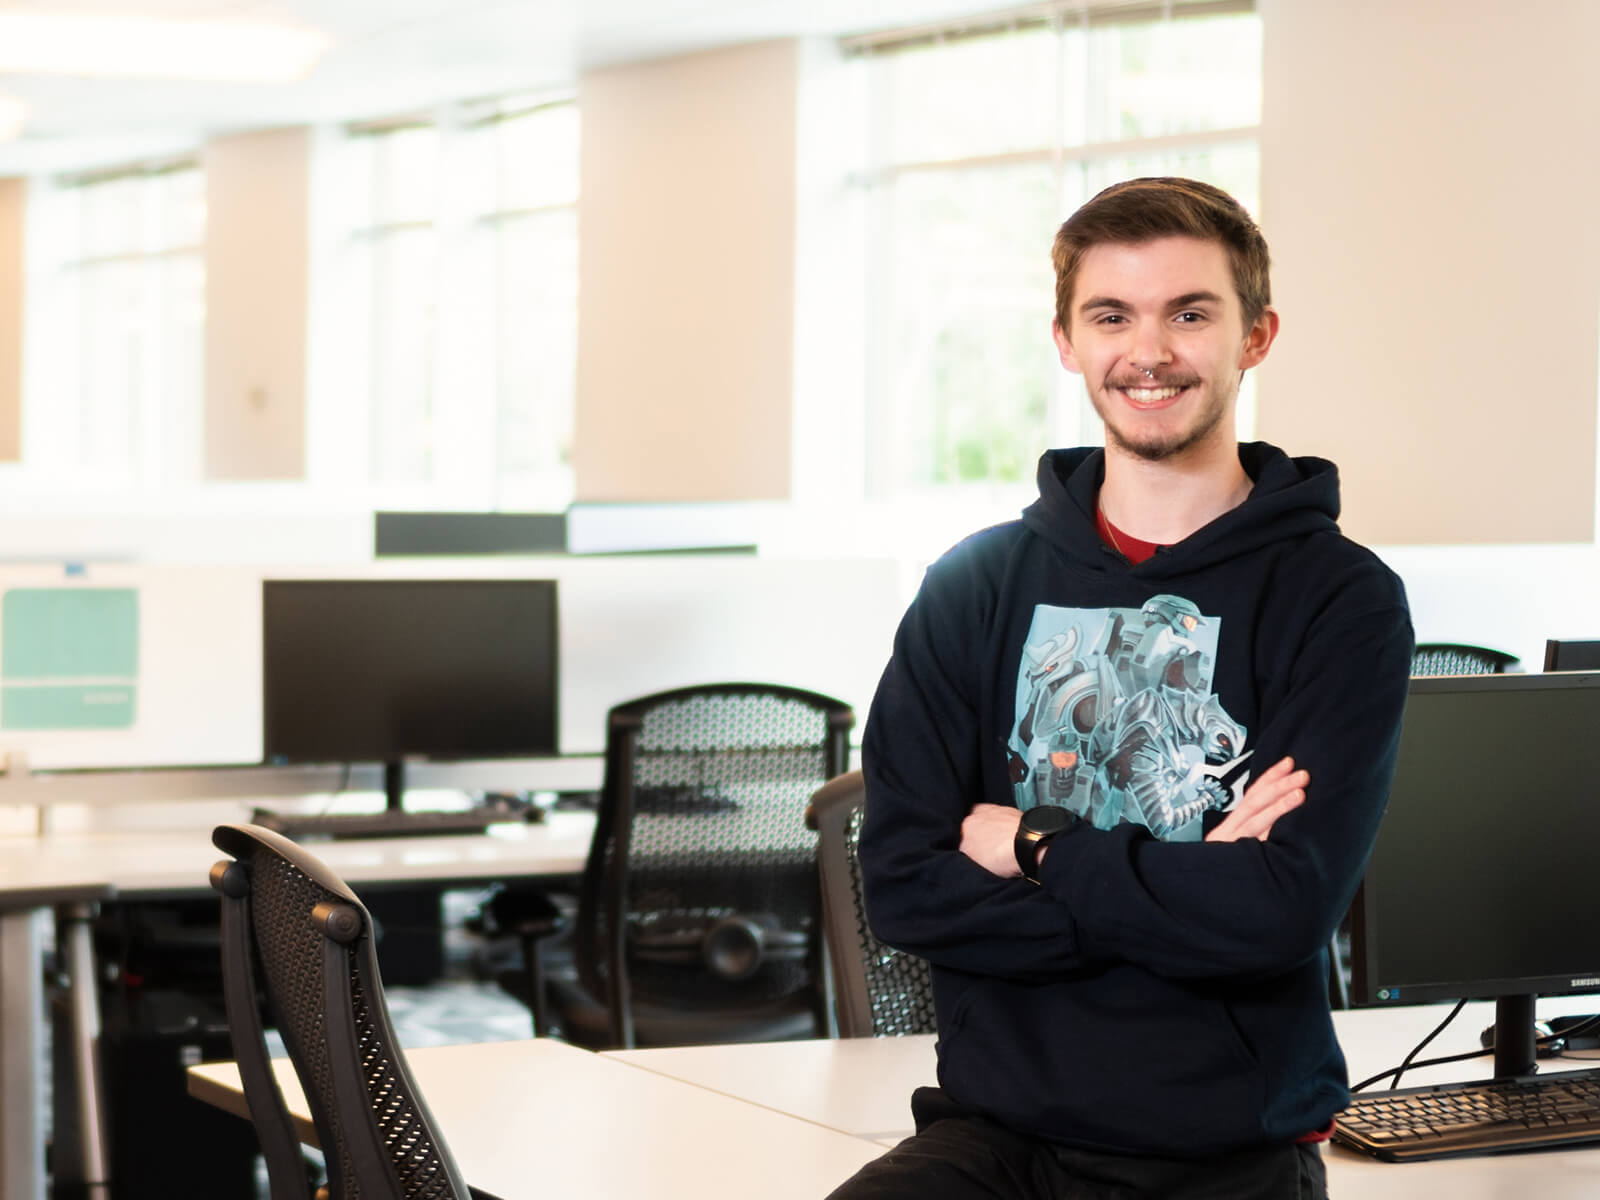 DigiPen Student of the Year Brandon Stam poses with their arms crossed in the campus lab.